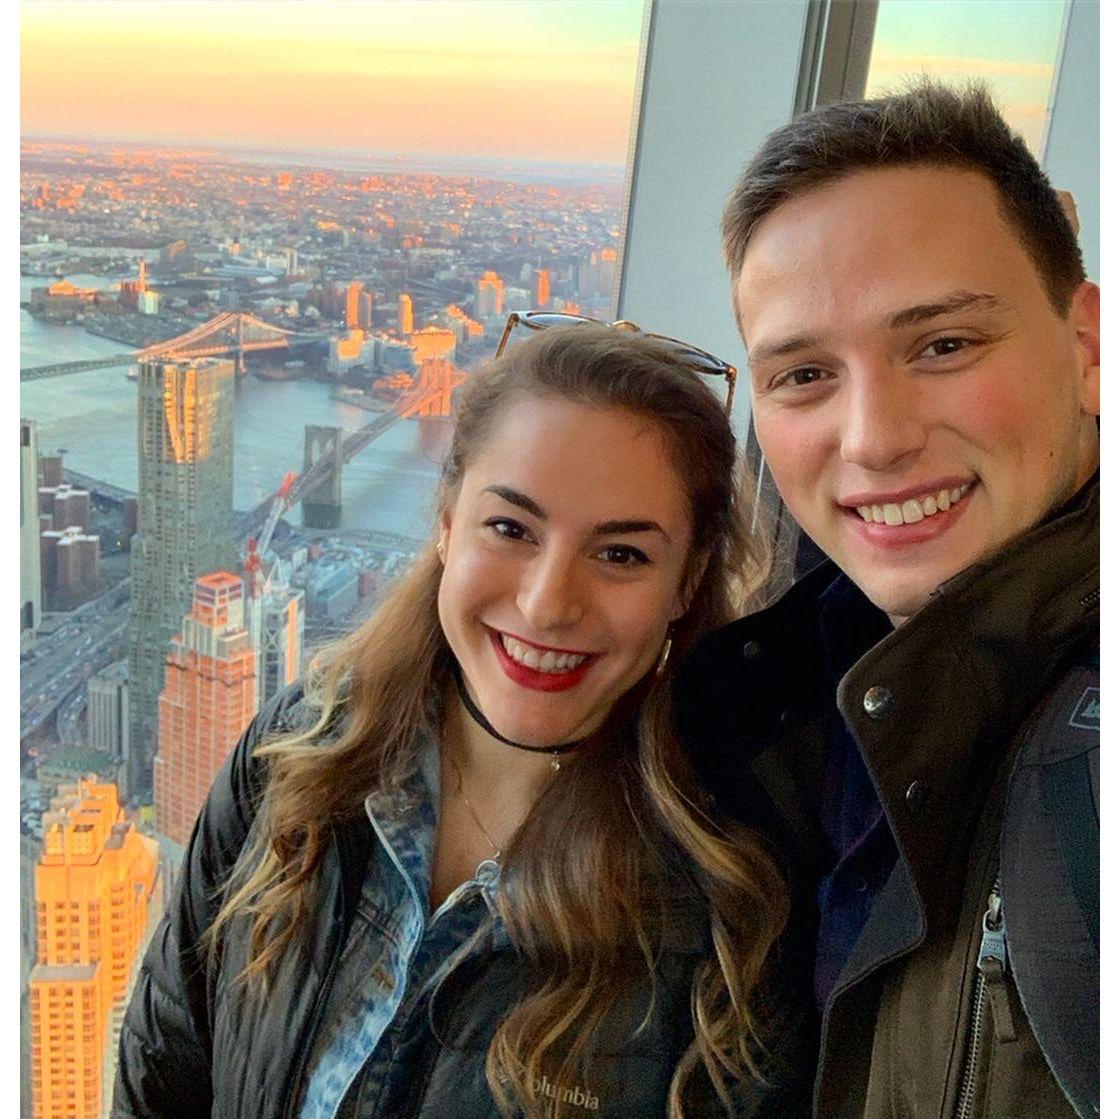 Valentine's Day at the top of the Freedom Tower